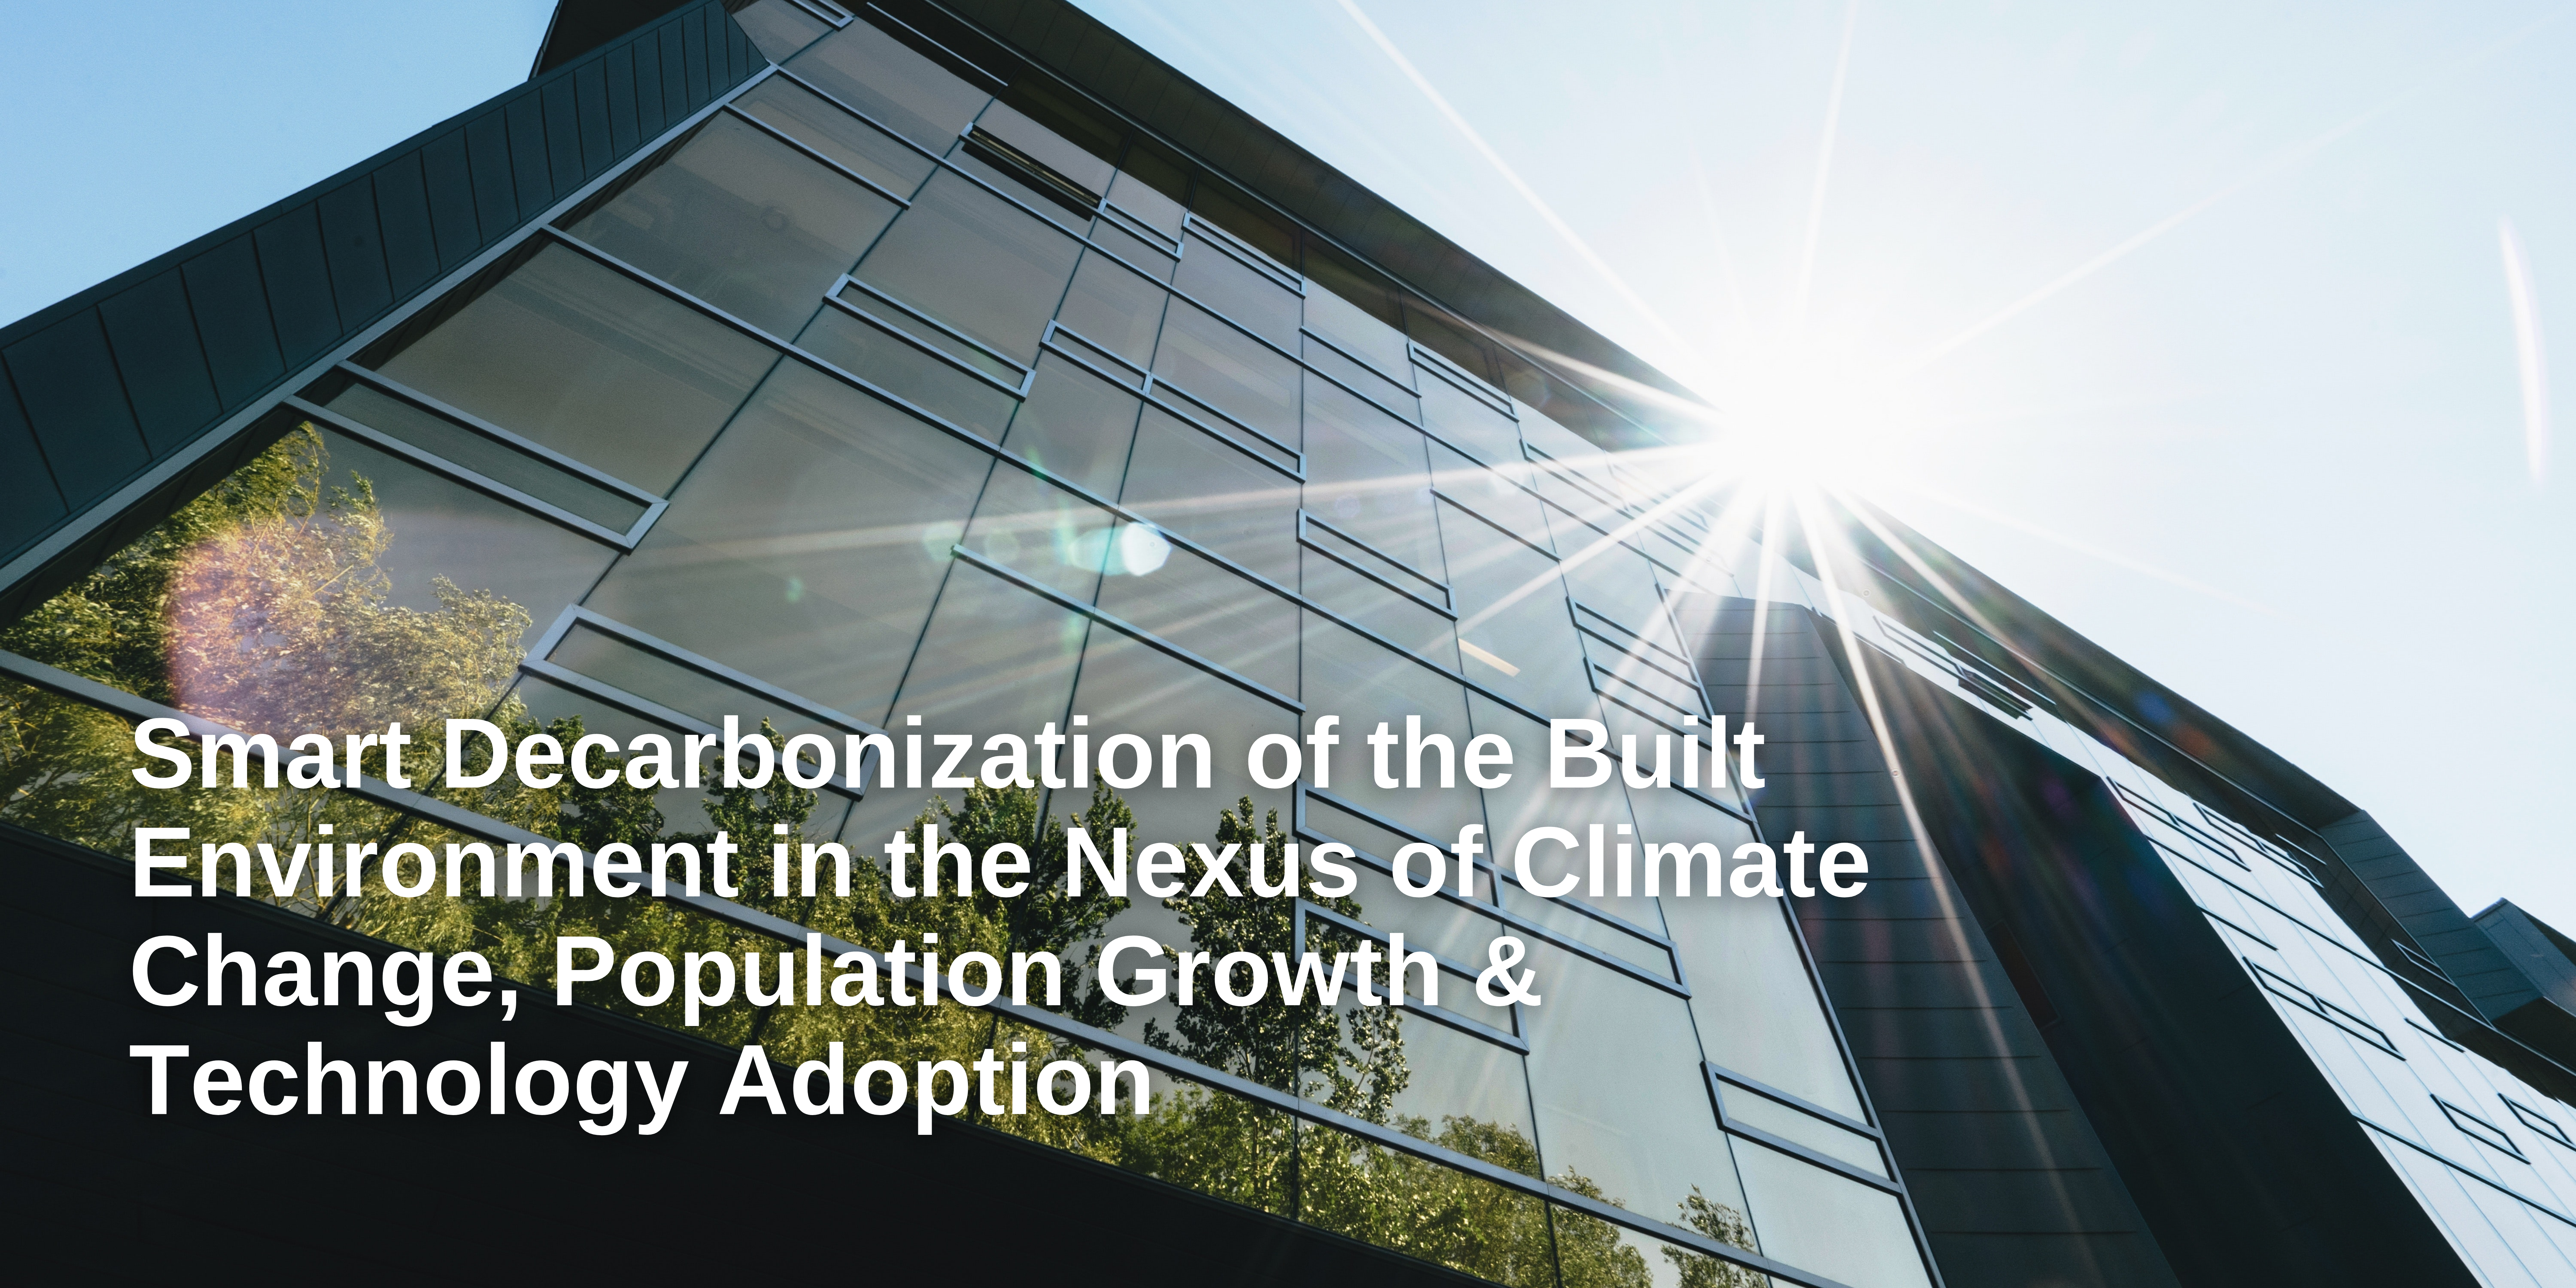 Smart Decarbonization of the Built Environment in the Nexus of Climate Change, Population Growth & Technology Adoption